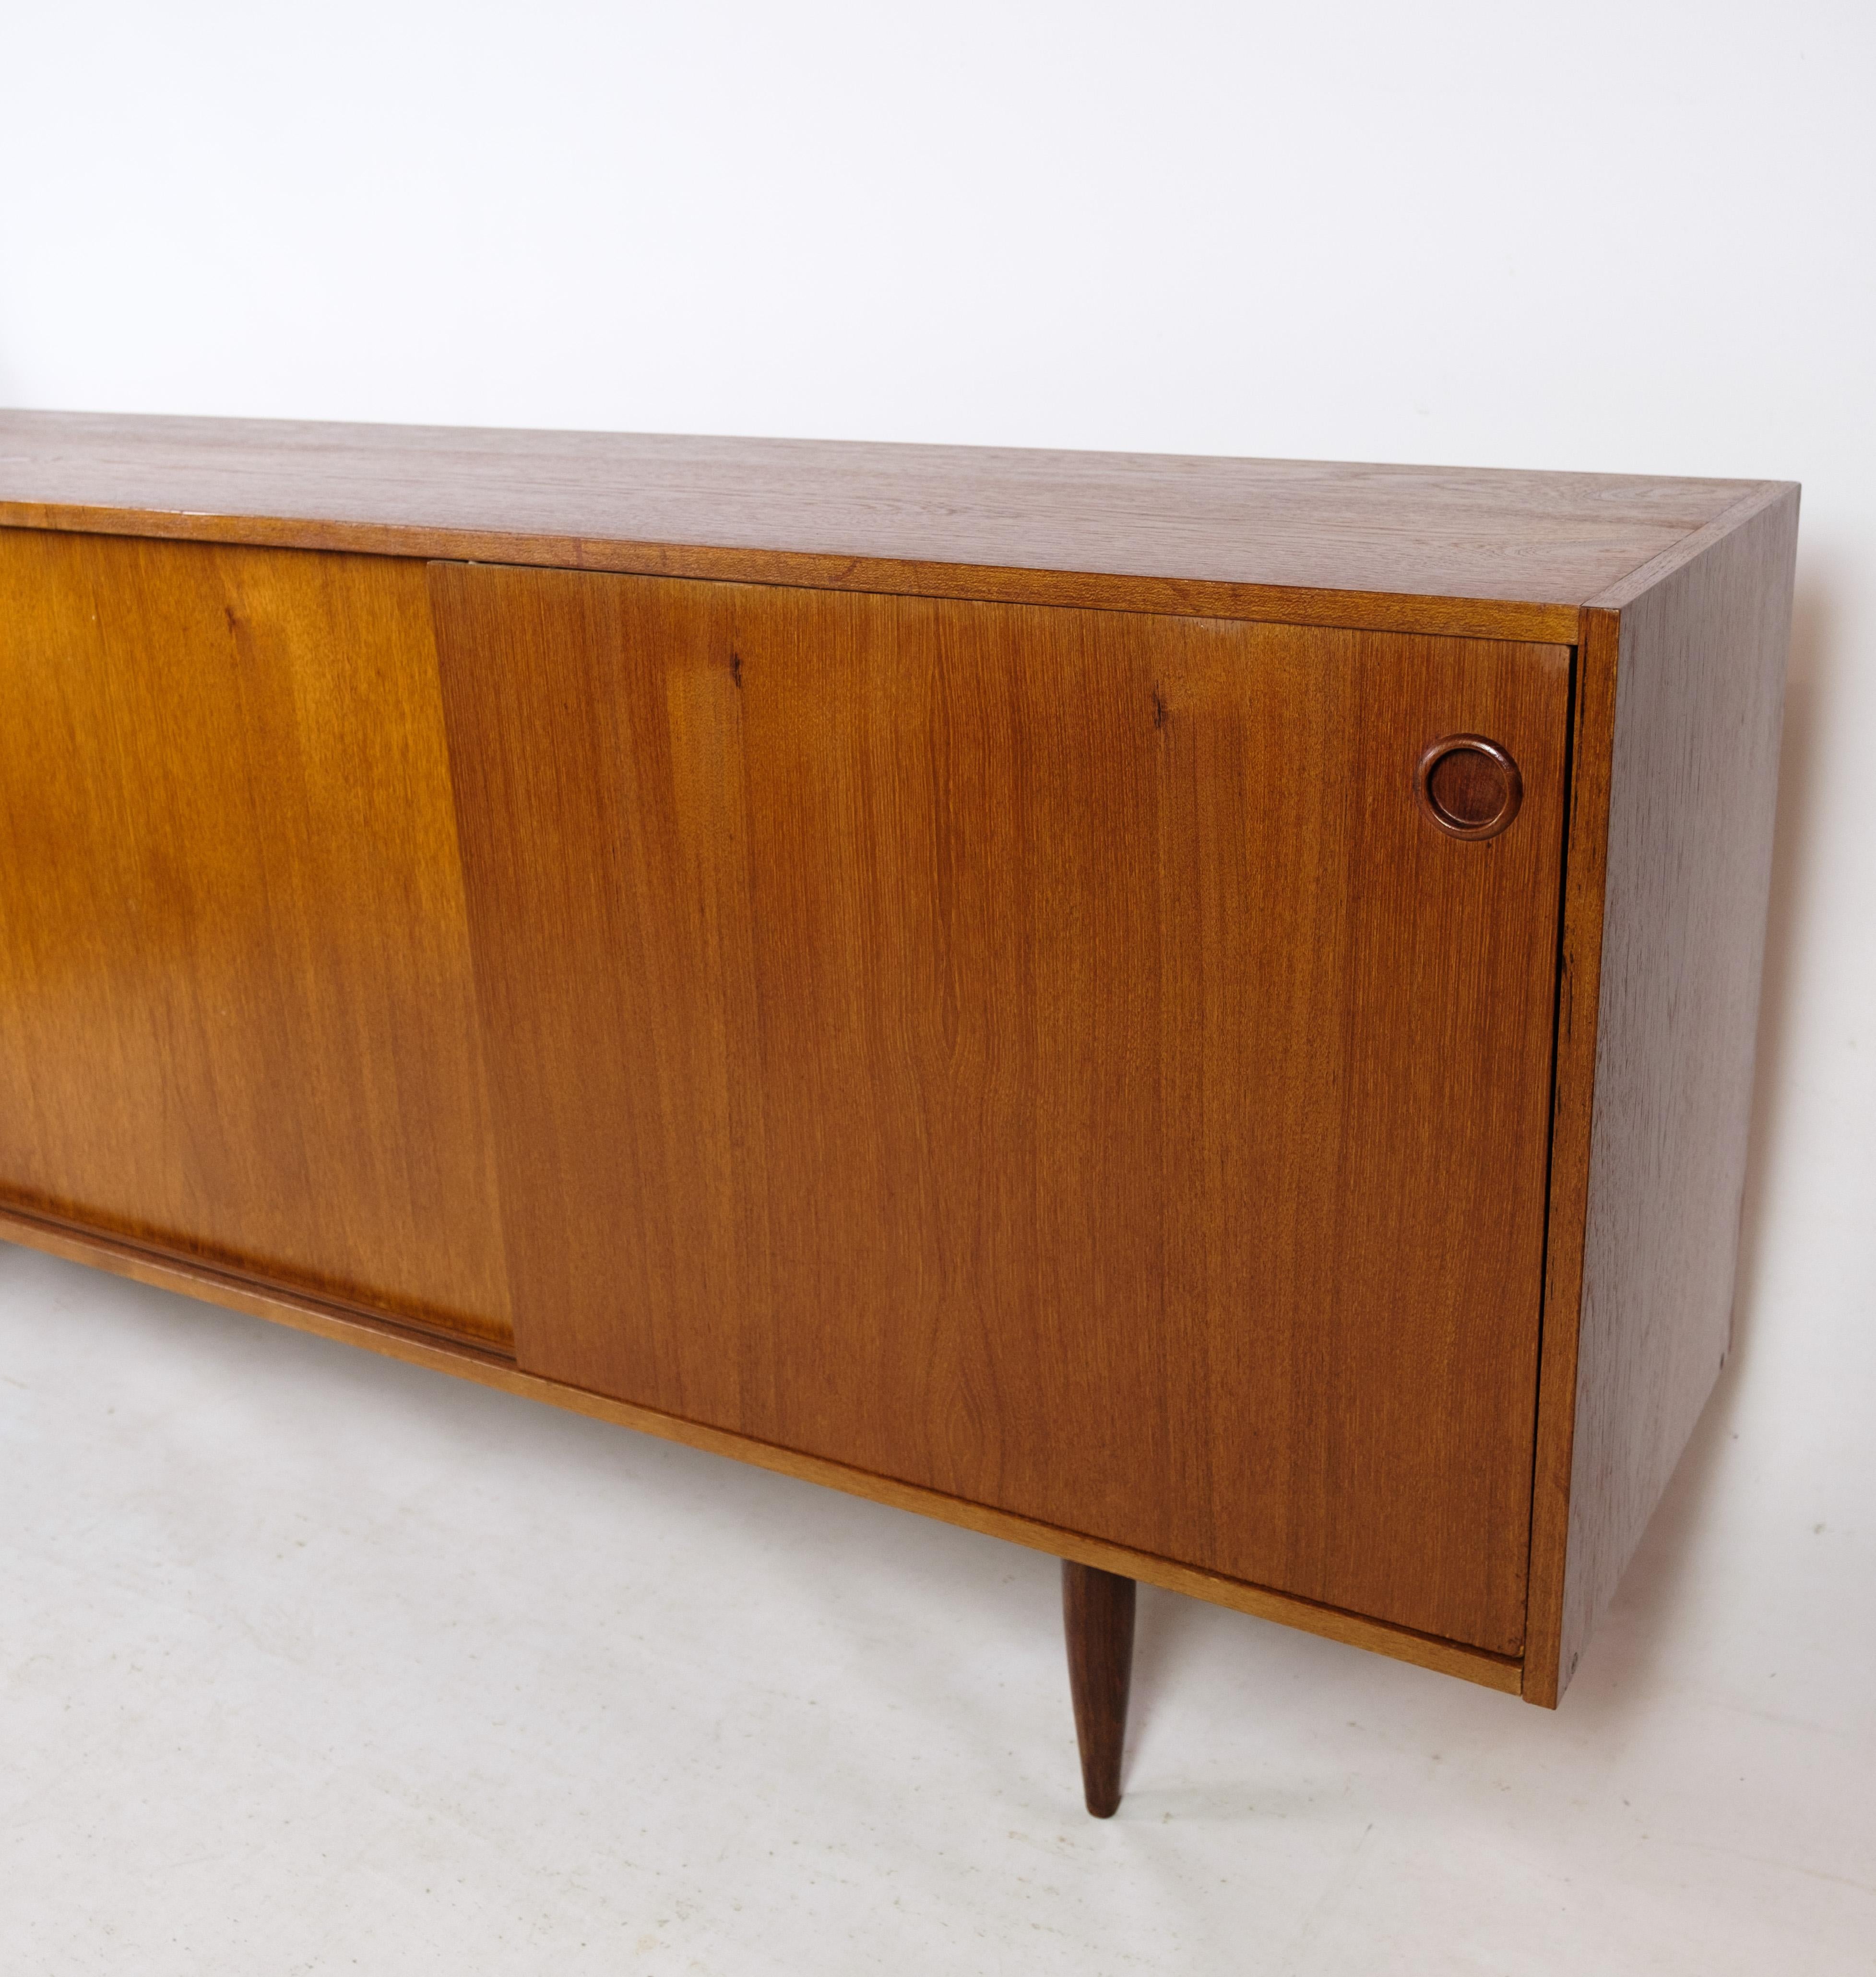 This sideboard is an exemplary piece of Danish design from the 1960s, crafted in the characteristic teak wood structure that is so sought after for its durability and beauty. With its clean lines and elegant proportions, the sideboard exudes a